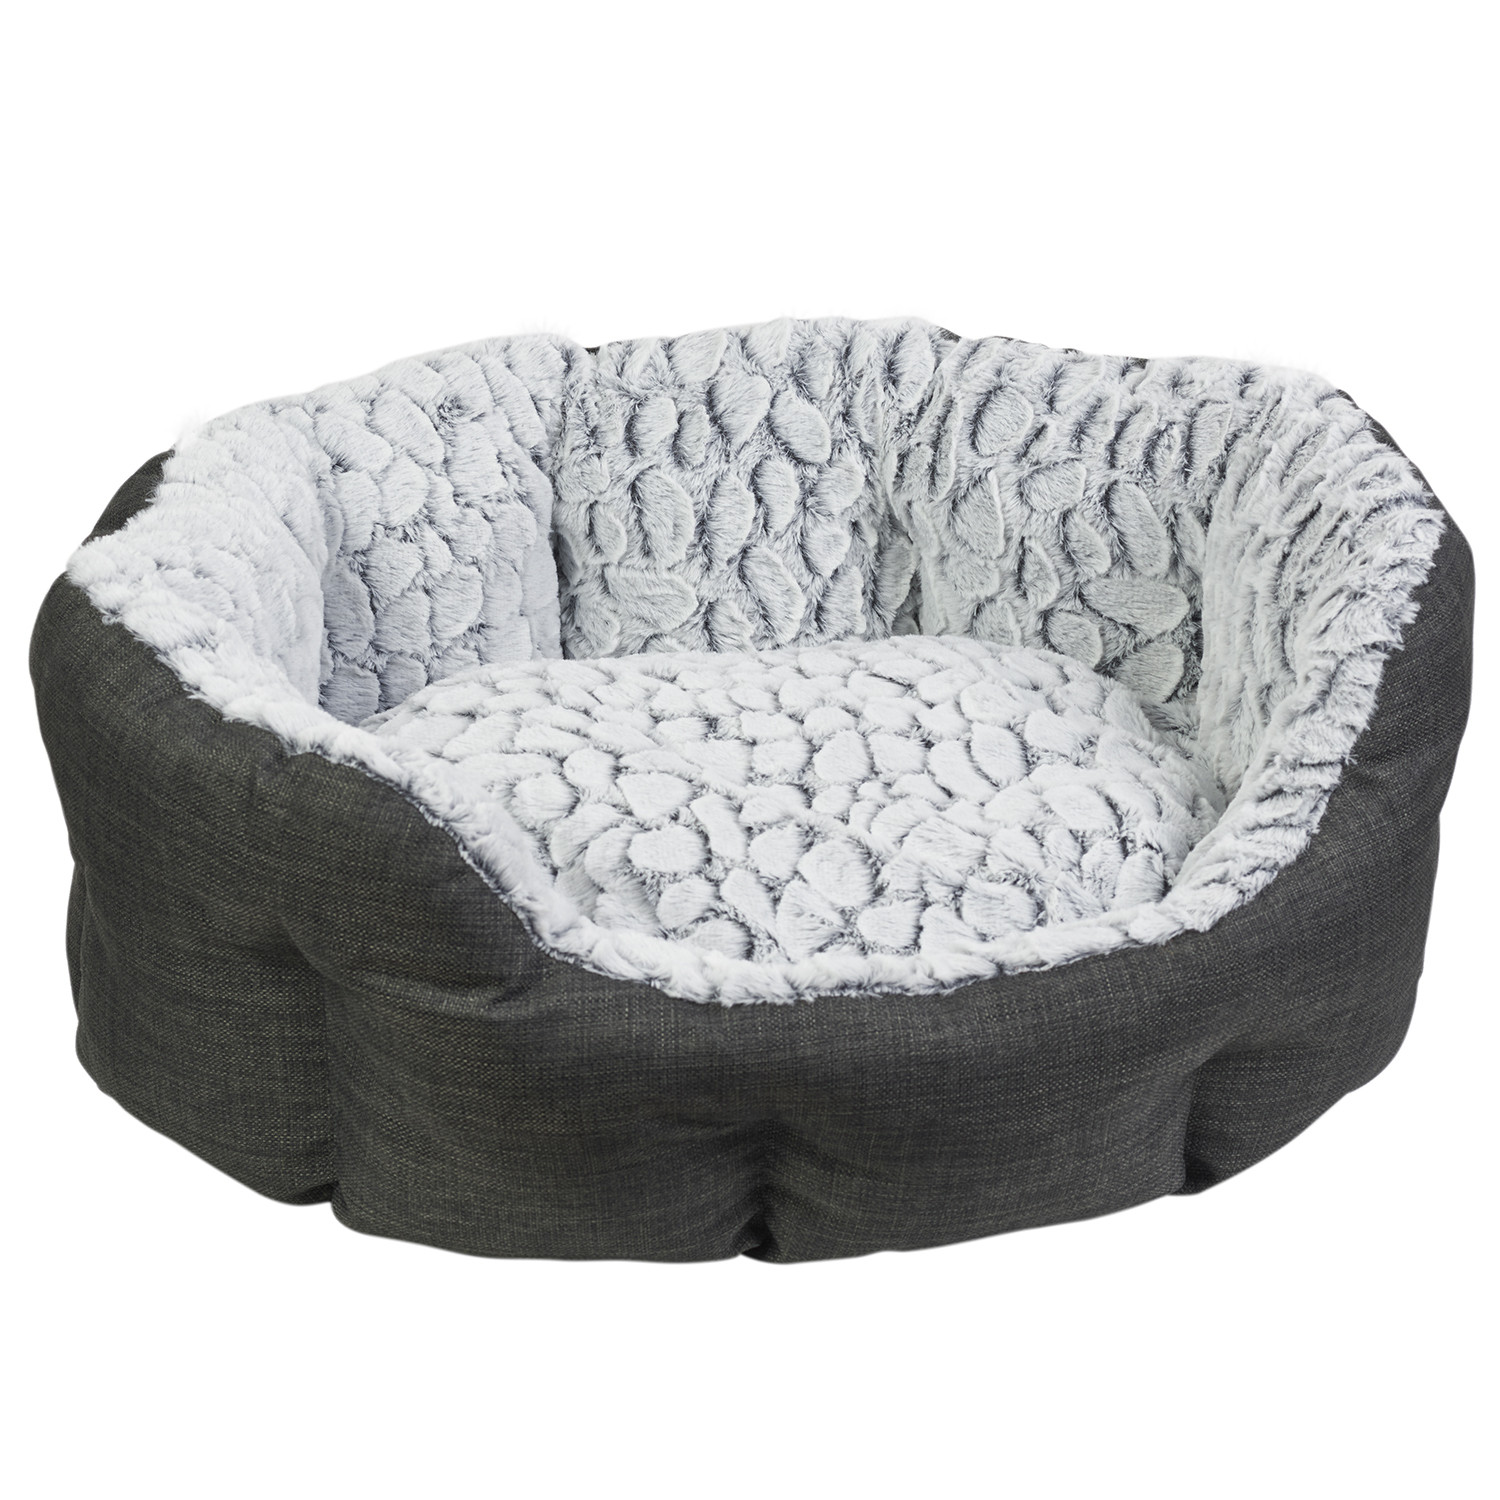 Clever Paws Grey Luxury Medium Pet Bed Image